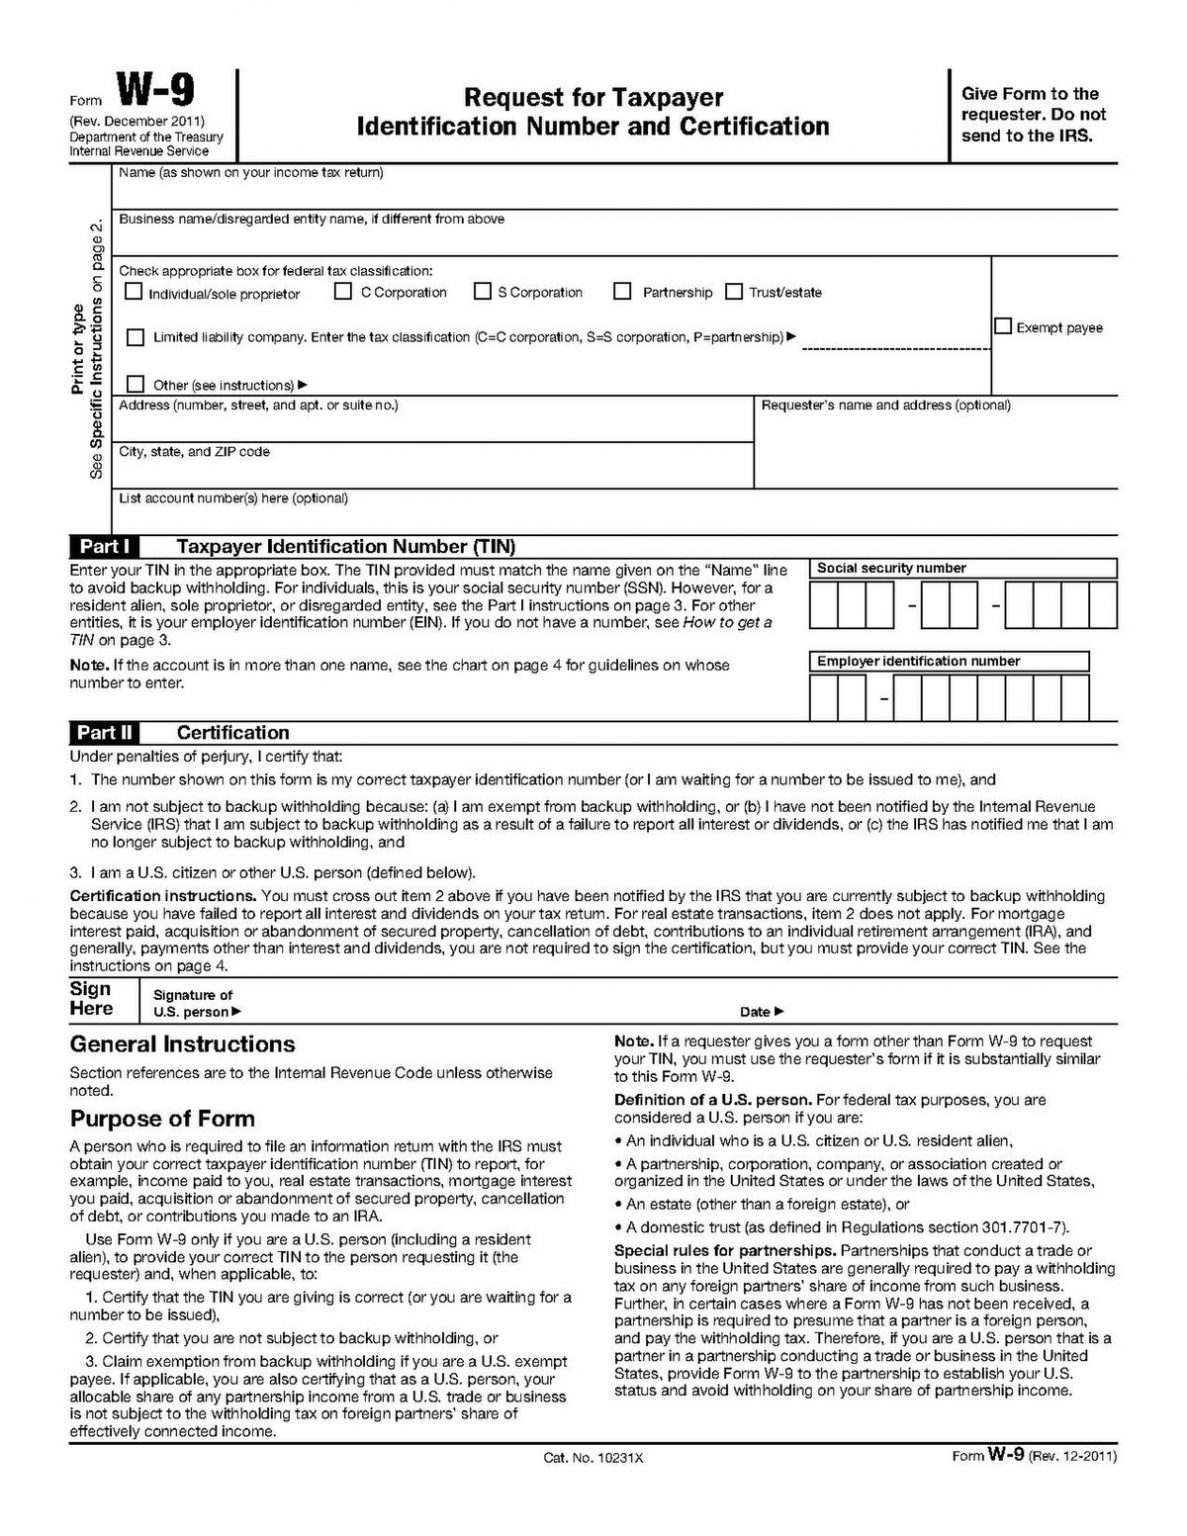 irs-form-w-9-printable-printable-w9-form-2023-updated-version